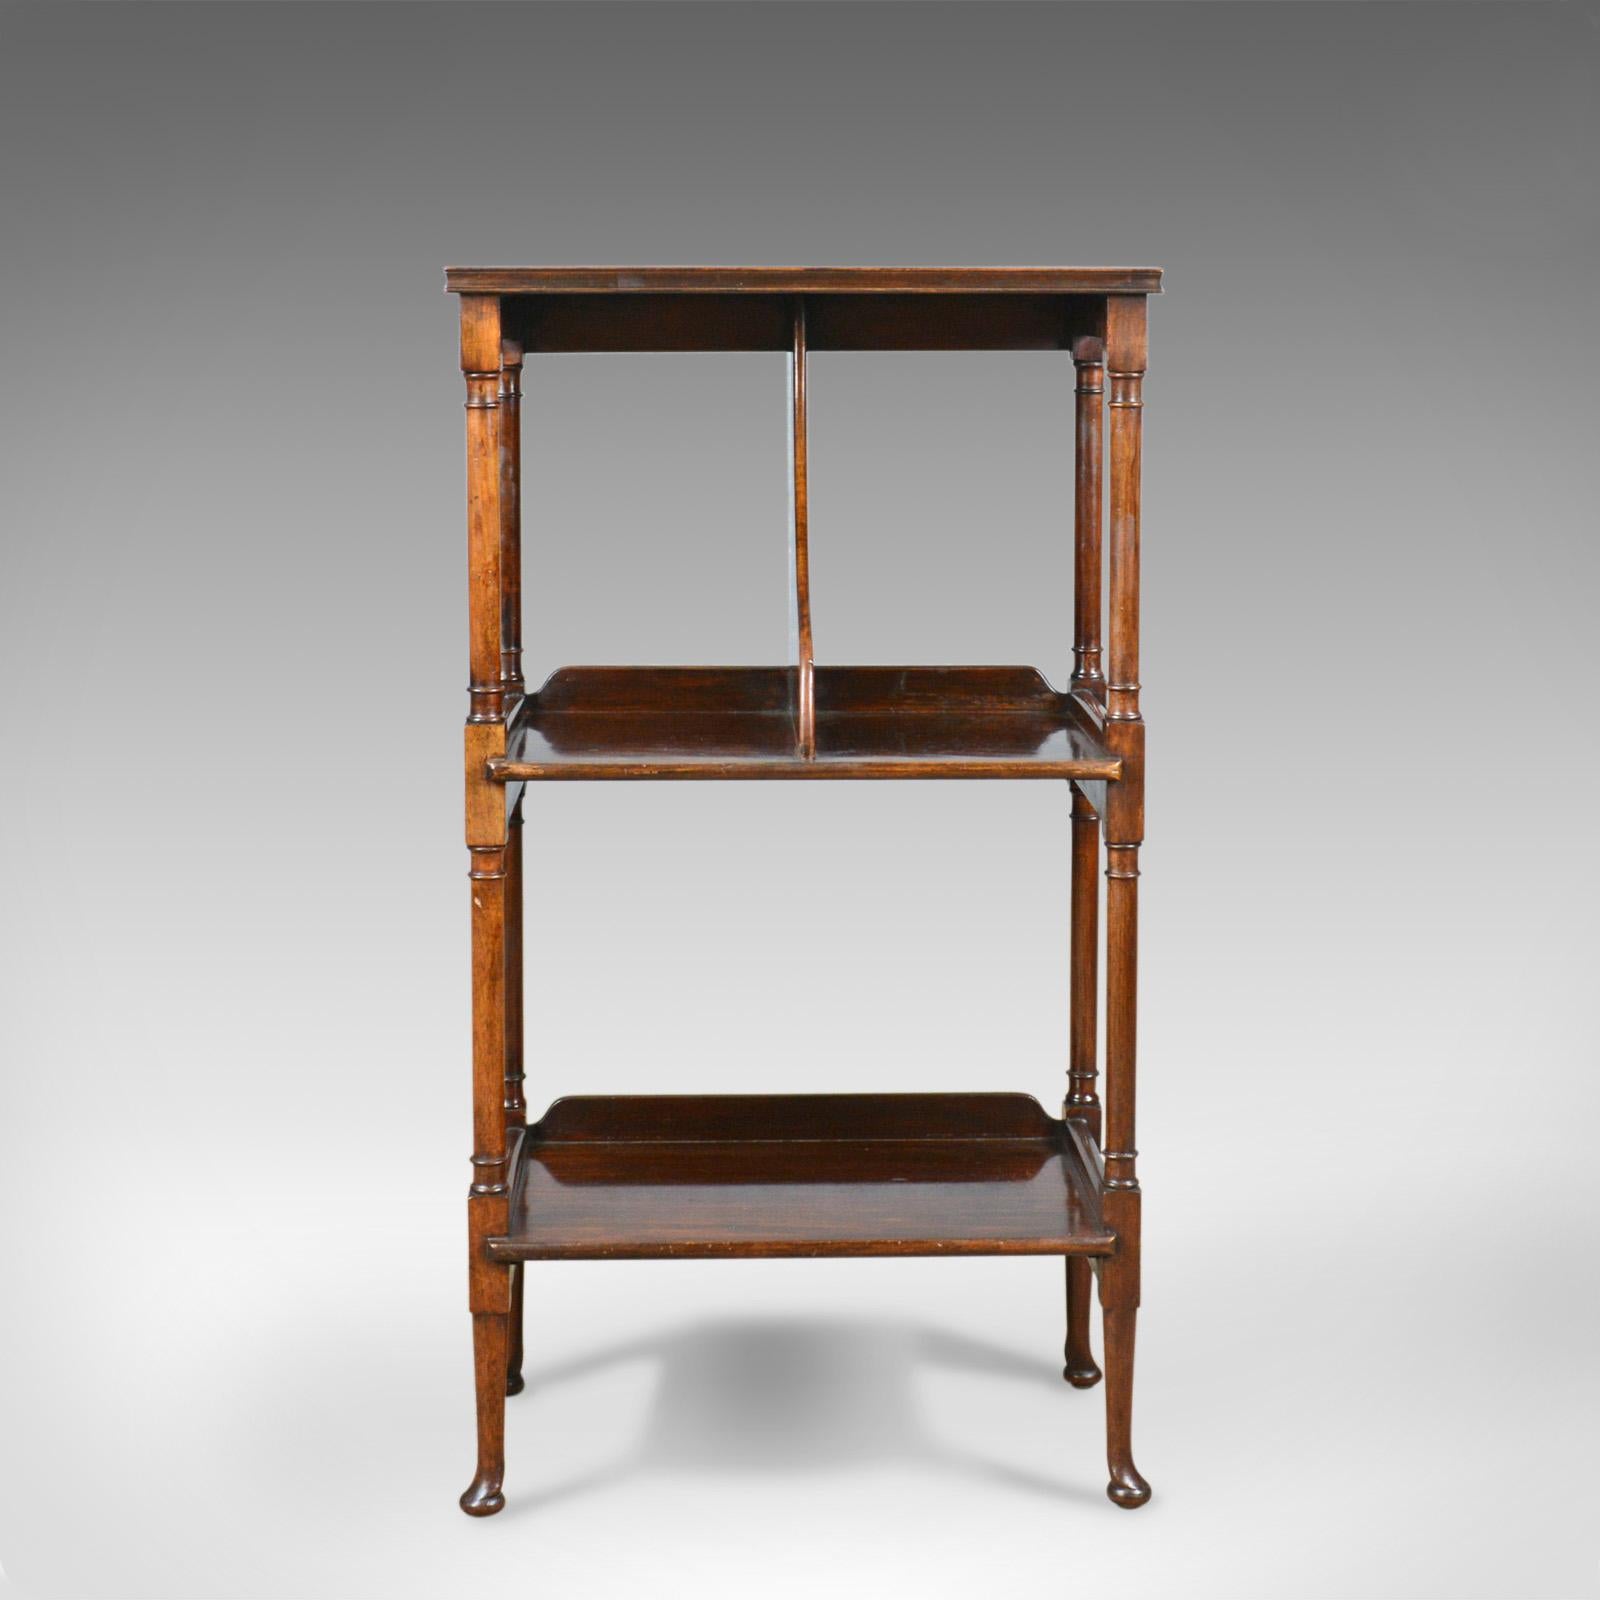 This is an antique bookshelf, an English, mahogany, three-tier, Regency revival whatnot display stand dating to the late 19th century, circa 1890. 

Delightful, rich, russet tones to the select mahogany
Good consistent color in the wax polished